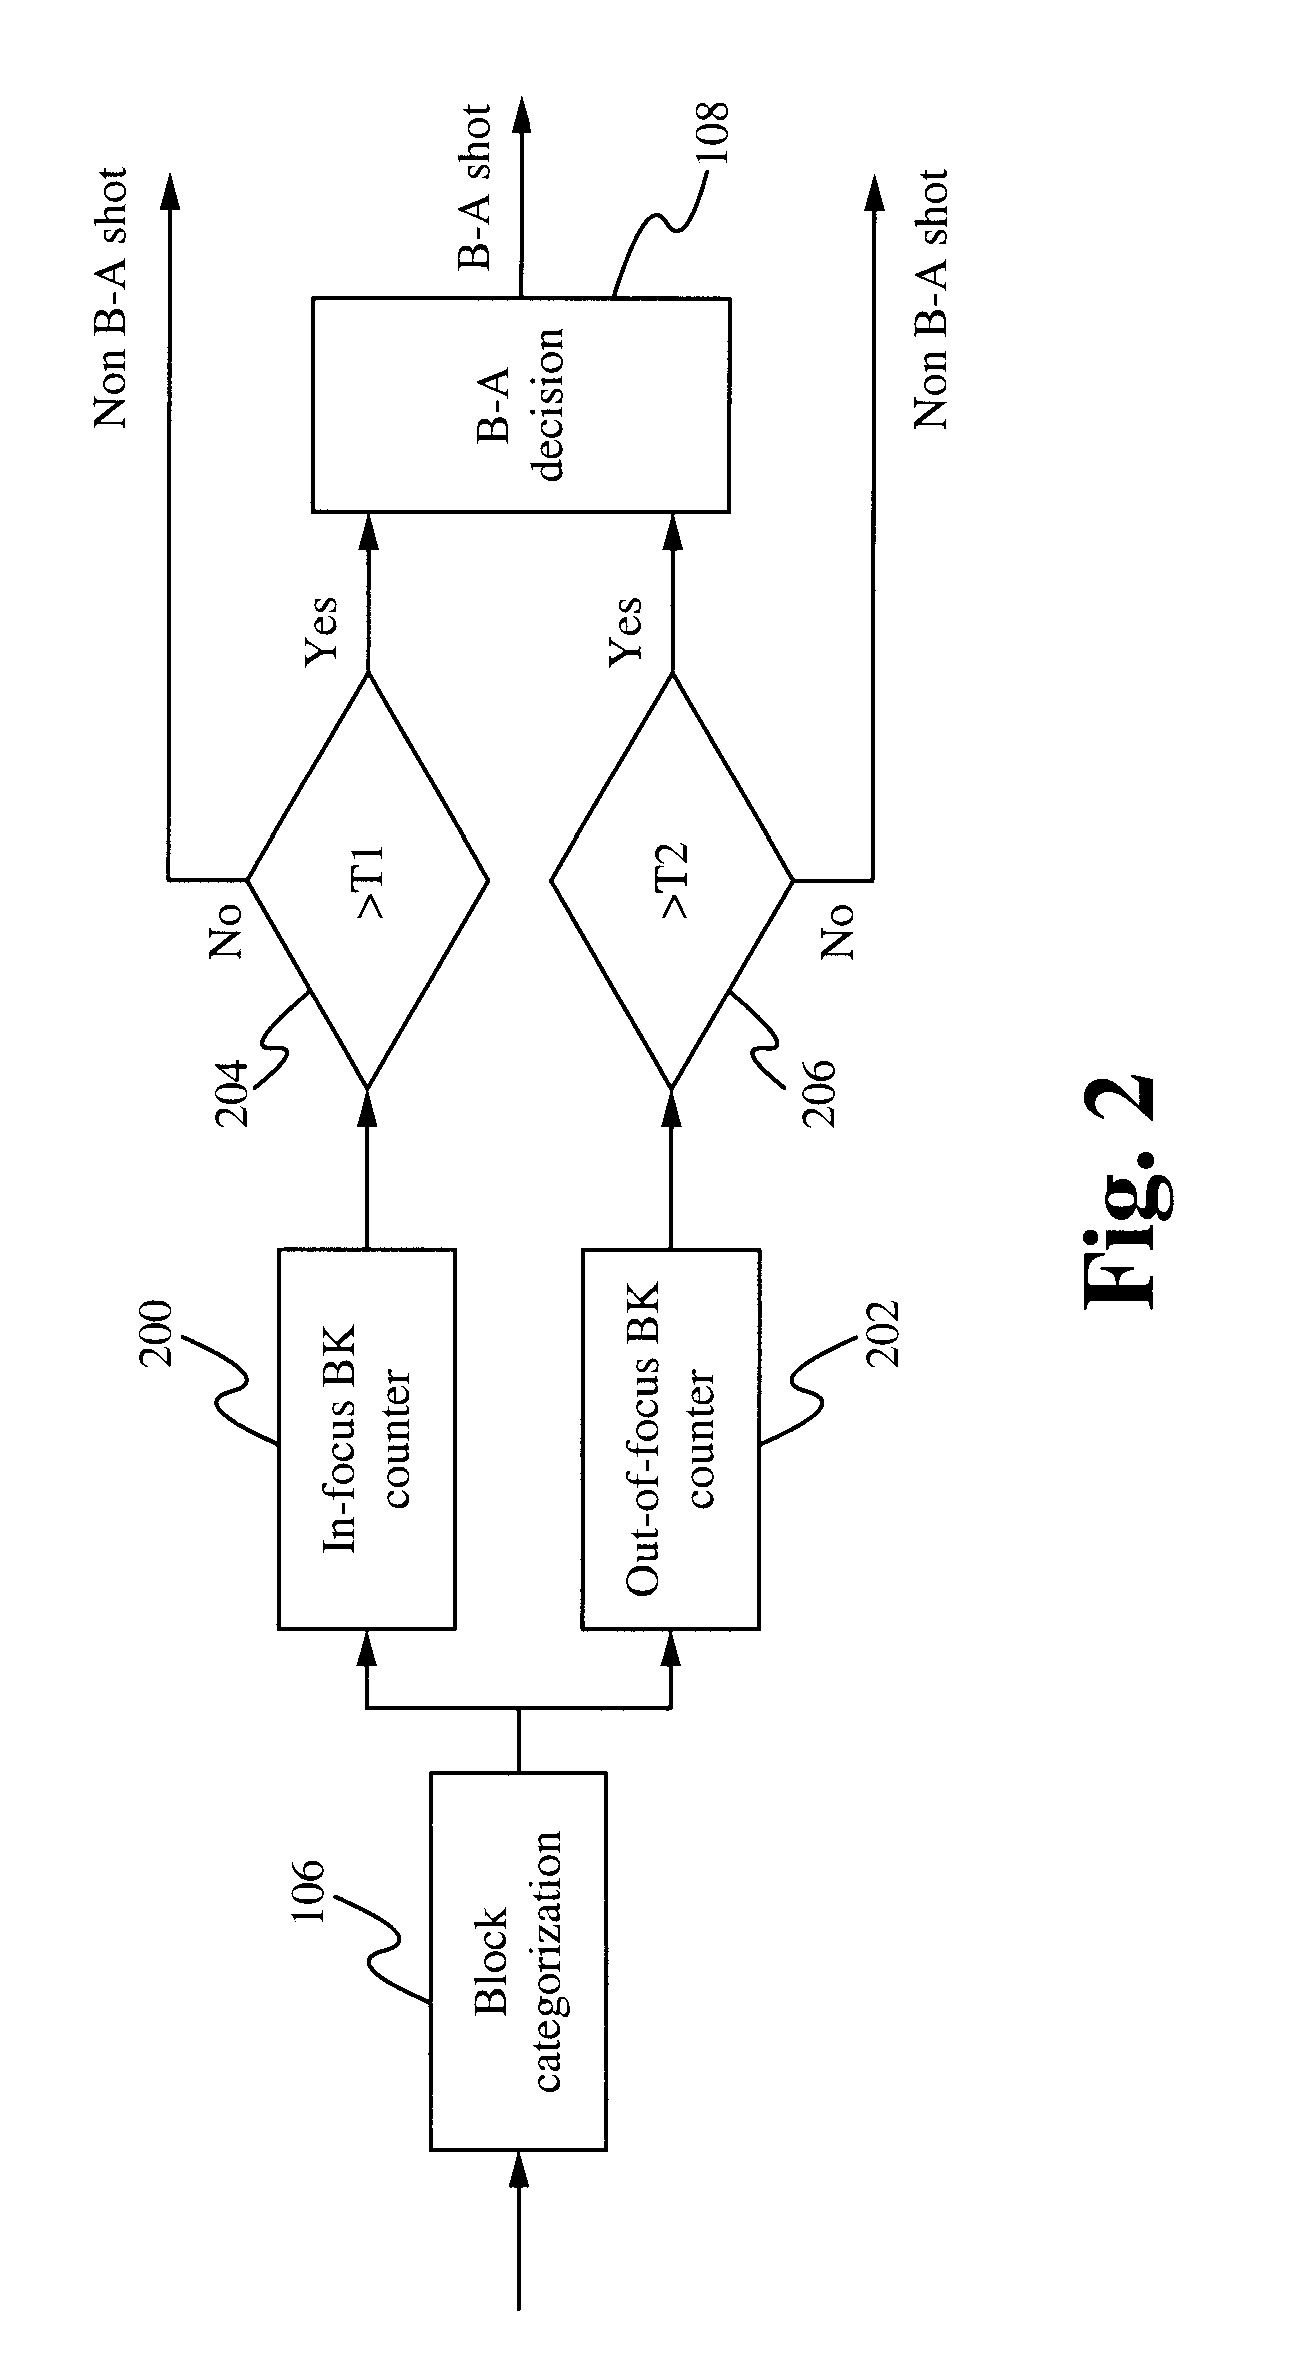 System and method for “Bokeh-Aji” shot detection and region of interest isolation